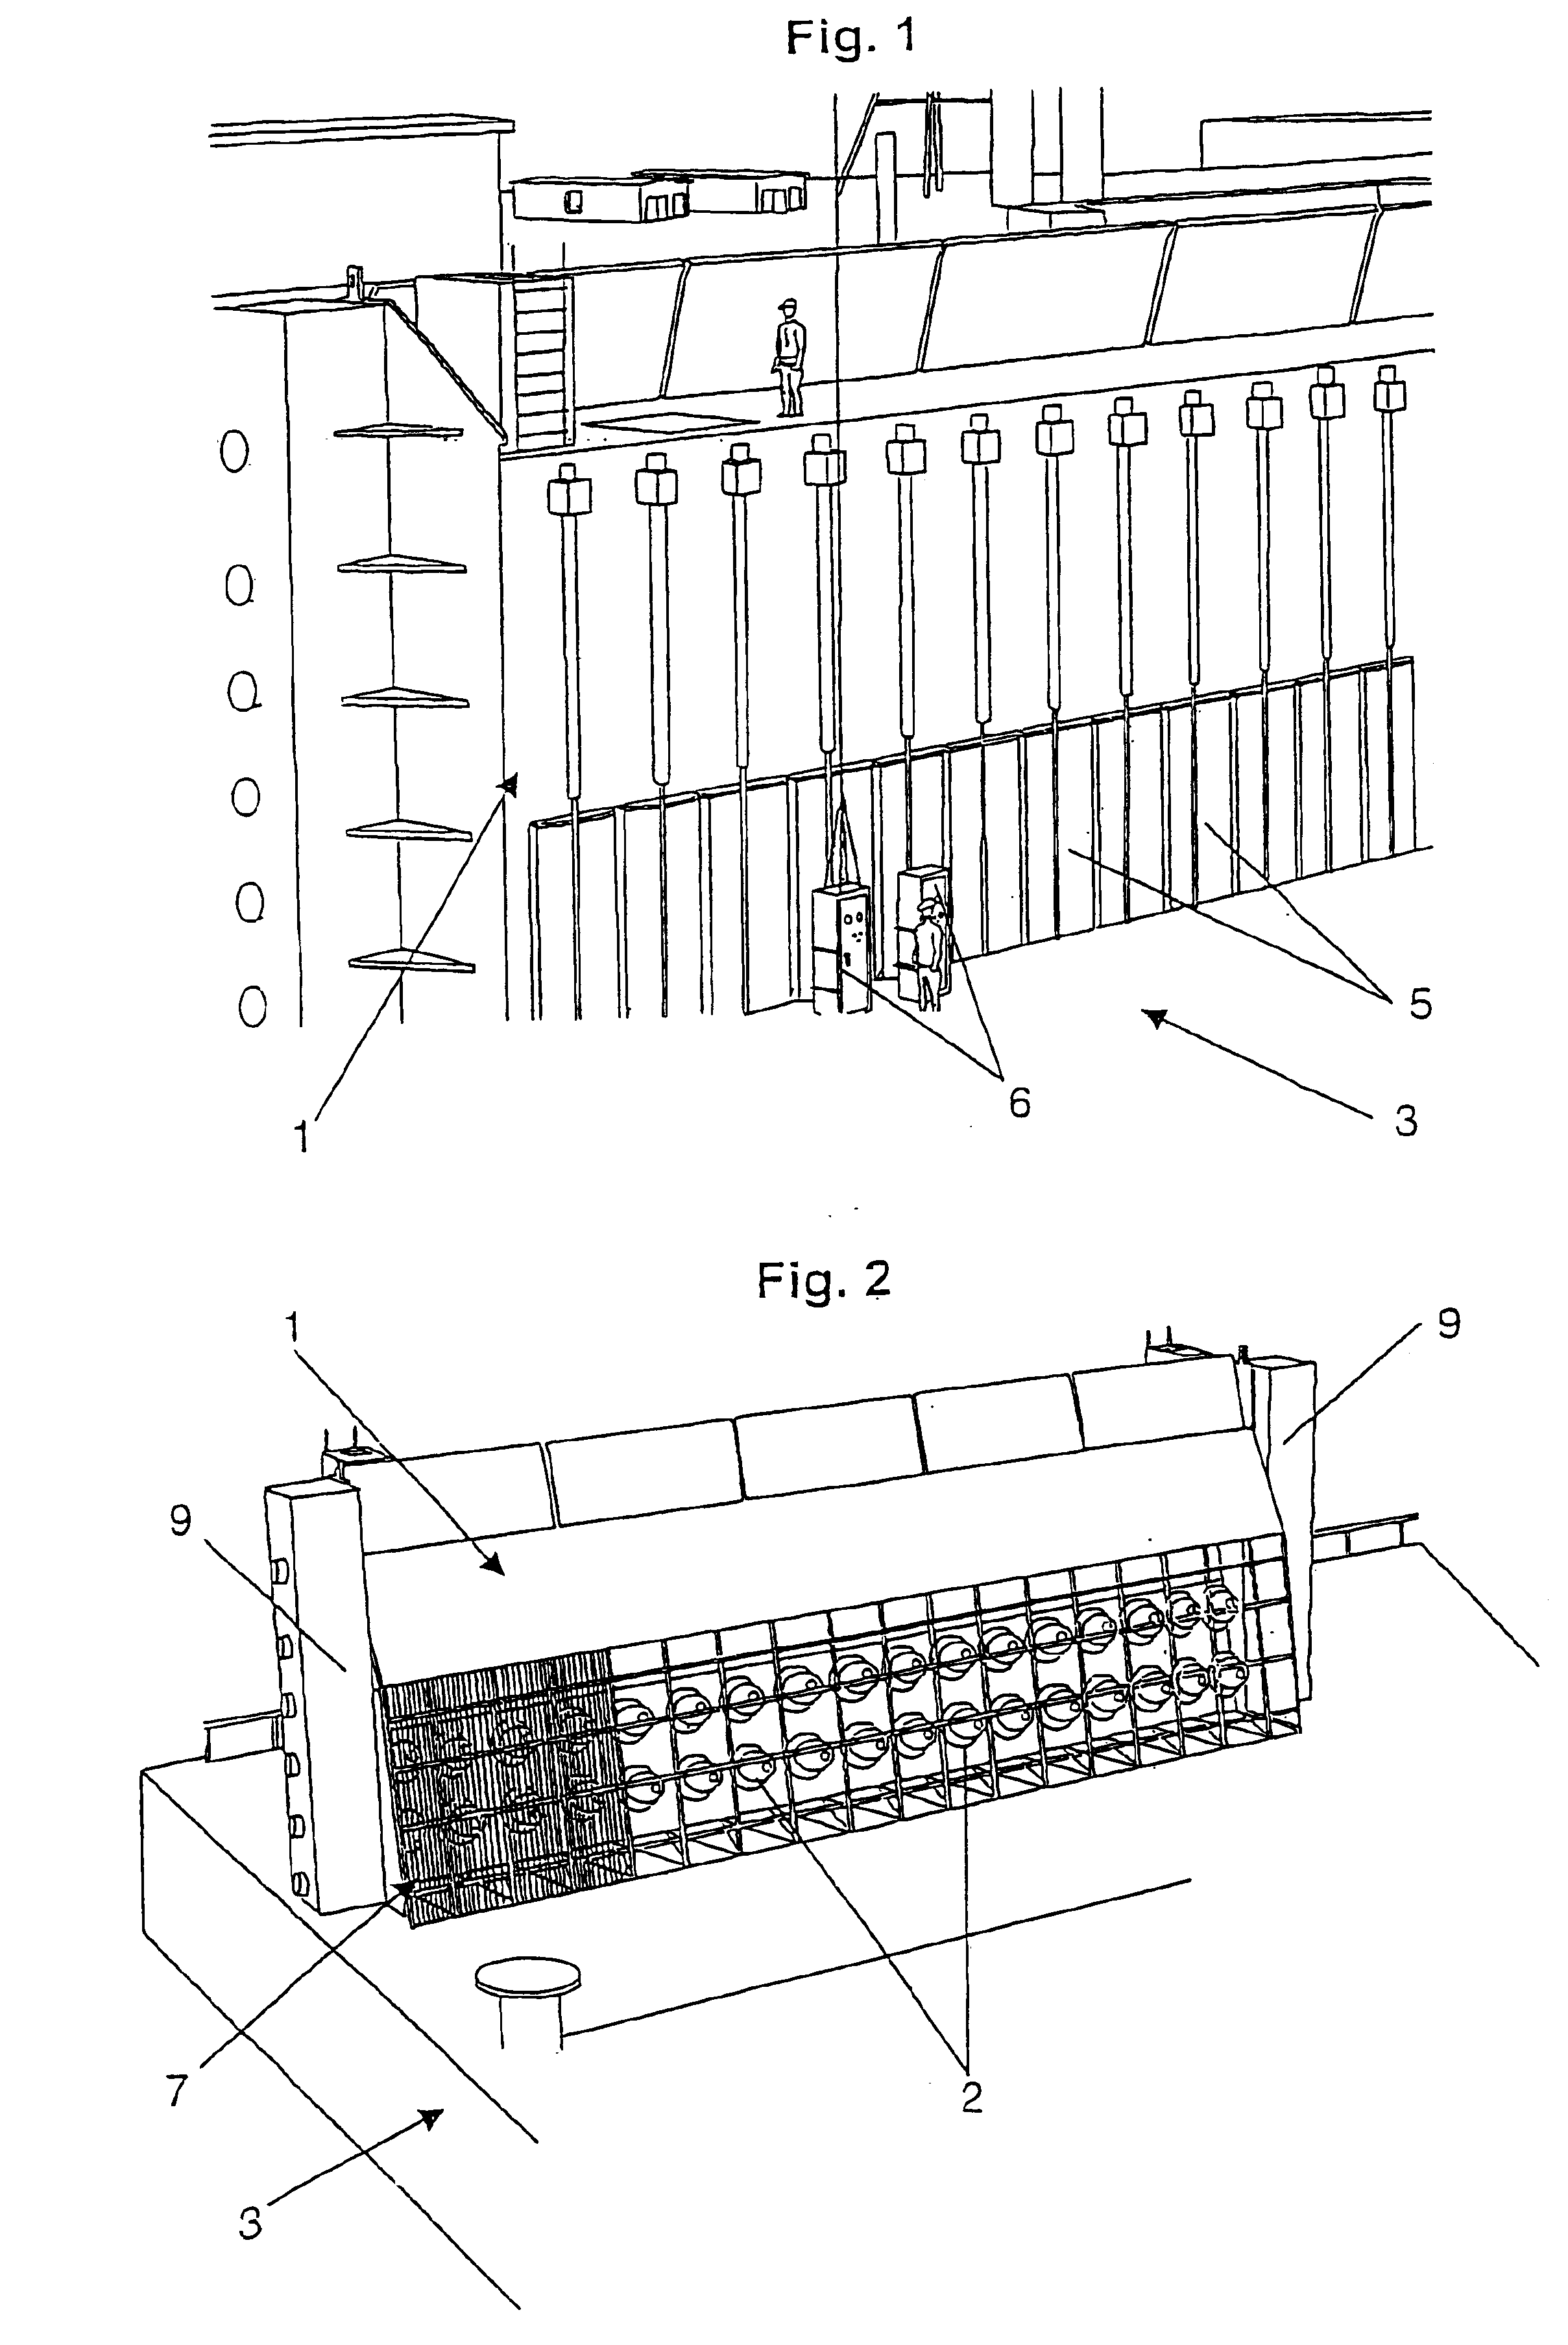 Method for producing a hydropower plant